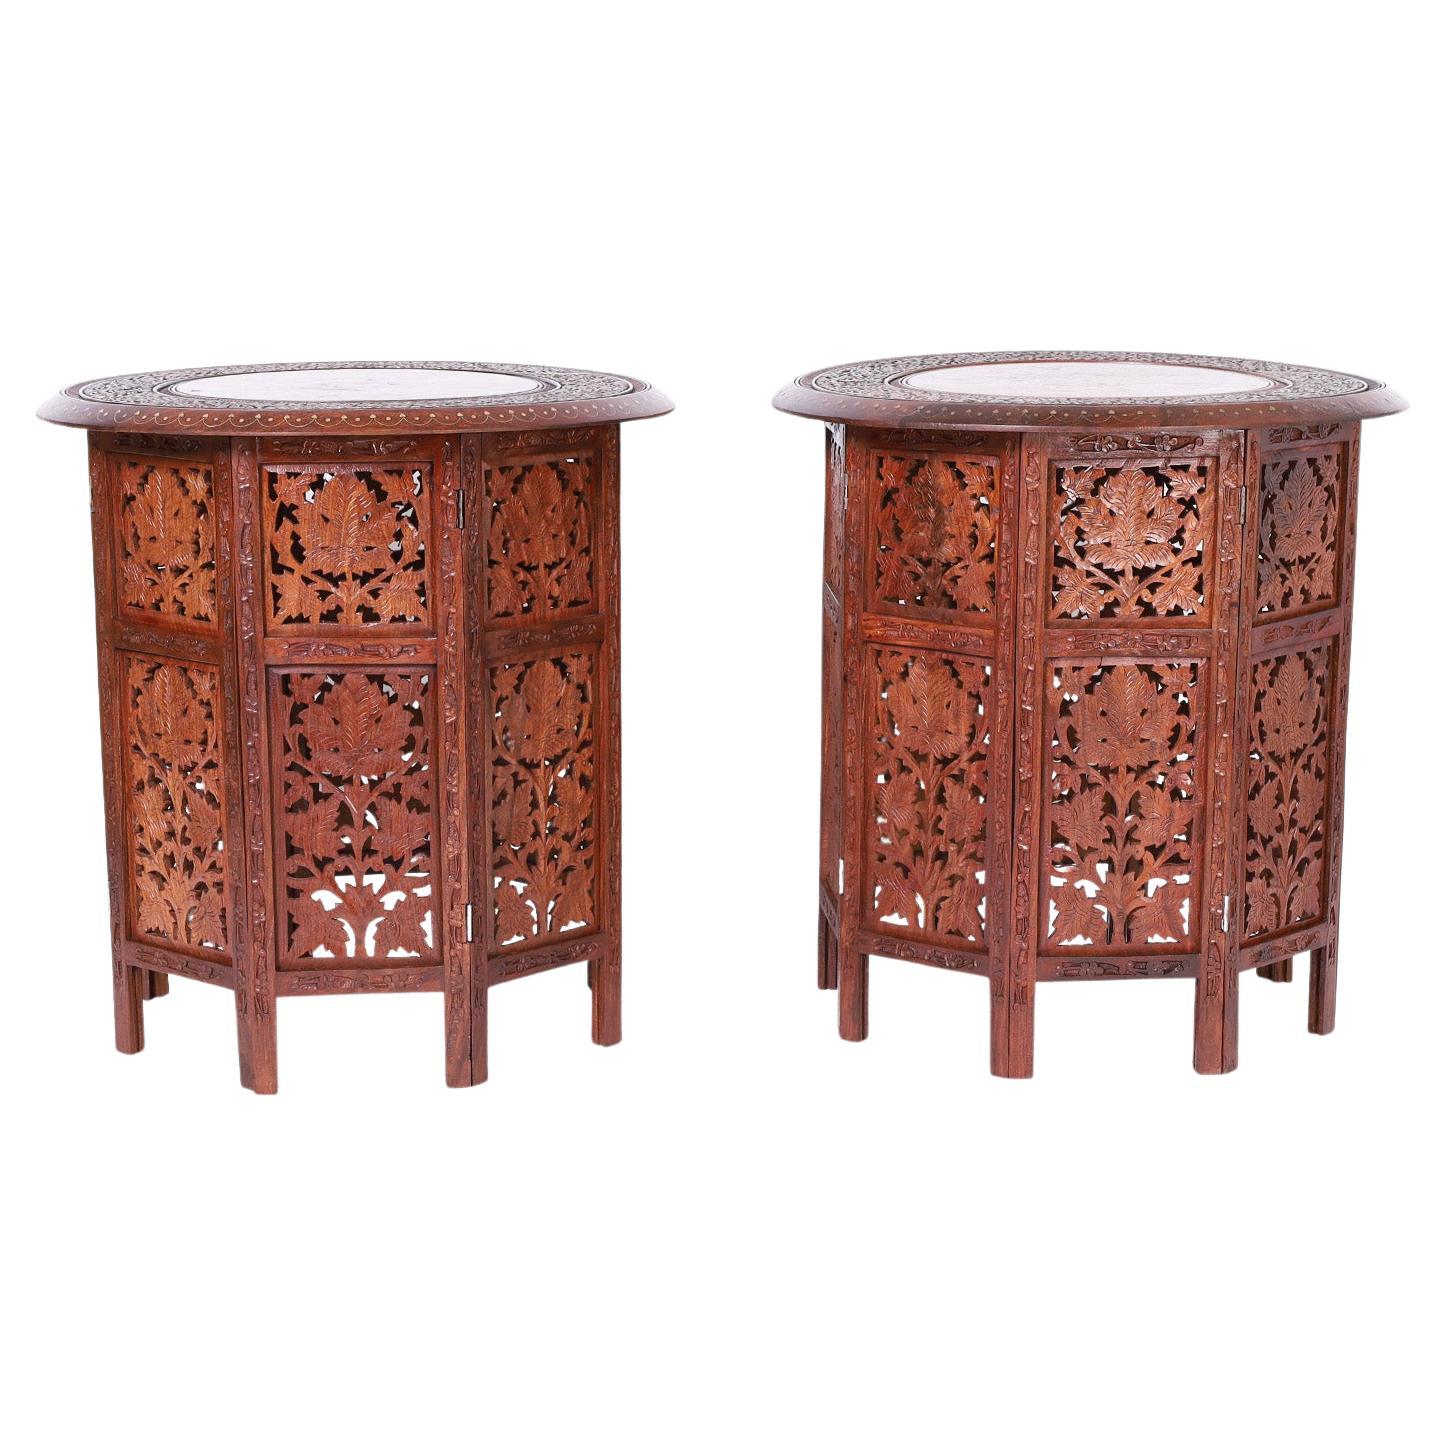 Pair of Anglo Indian Carved and Inlaid Tables or Stands